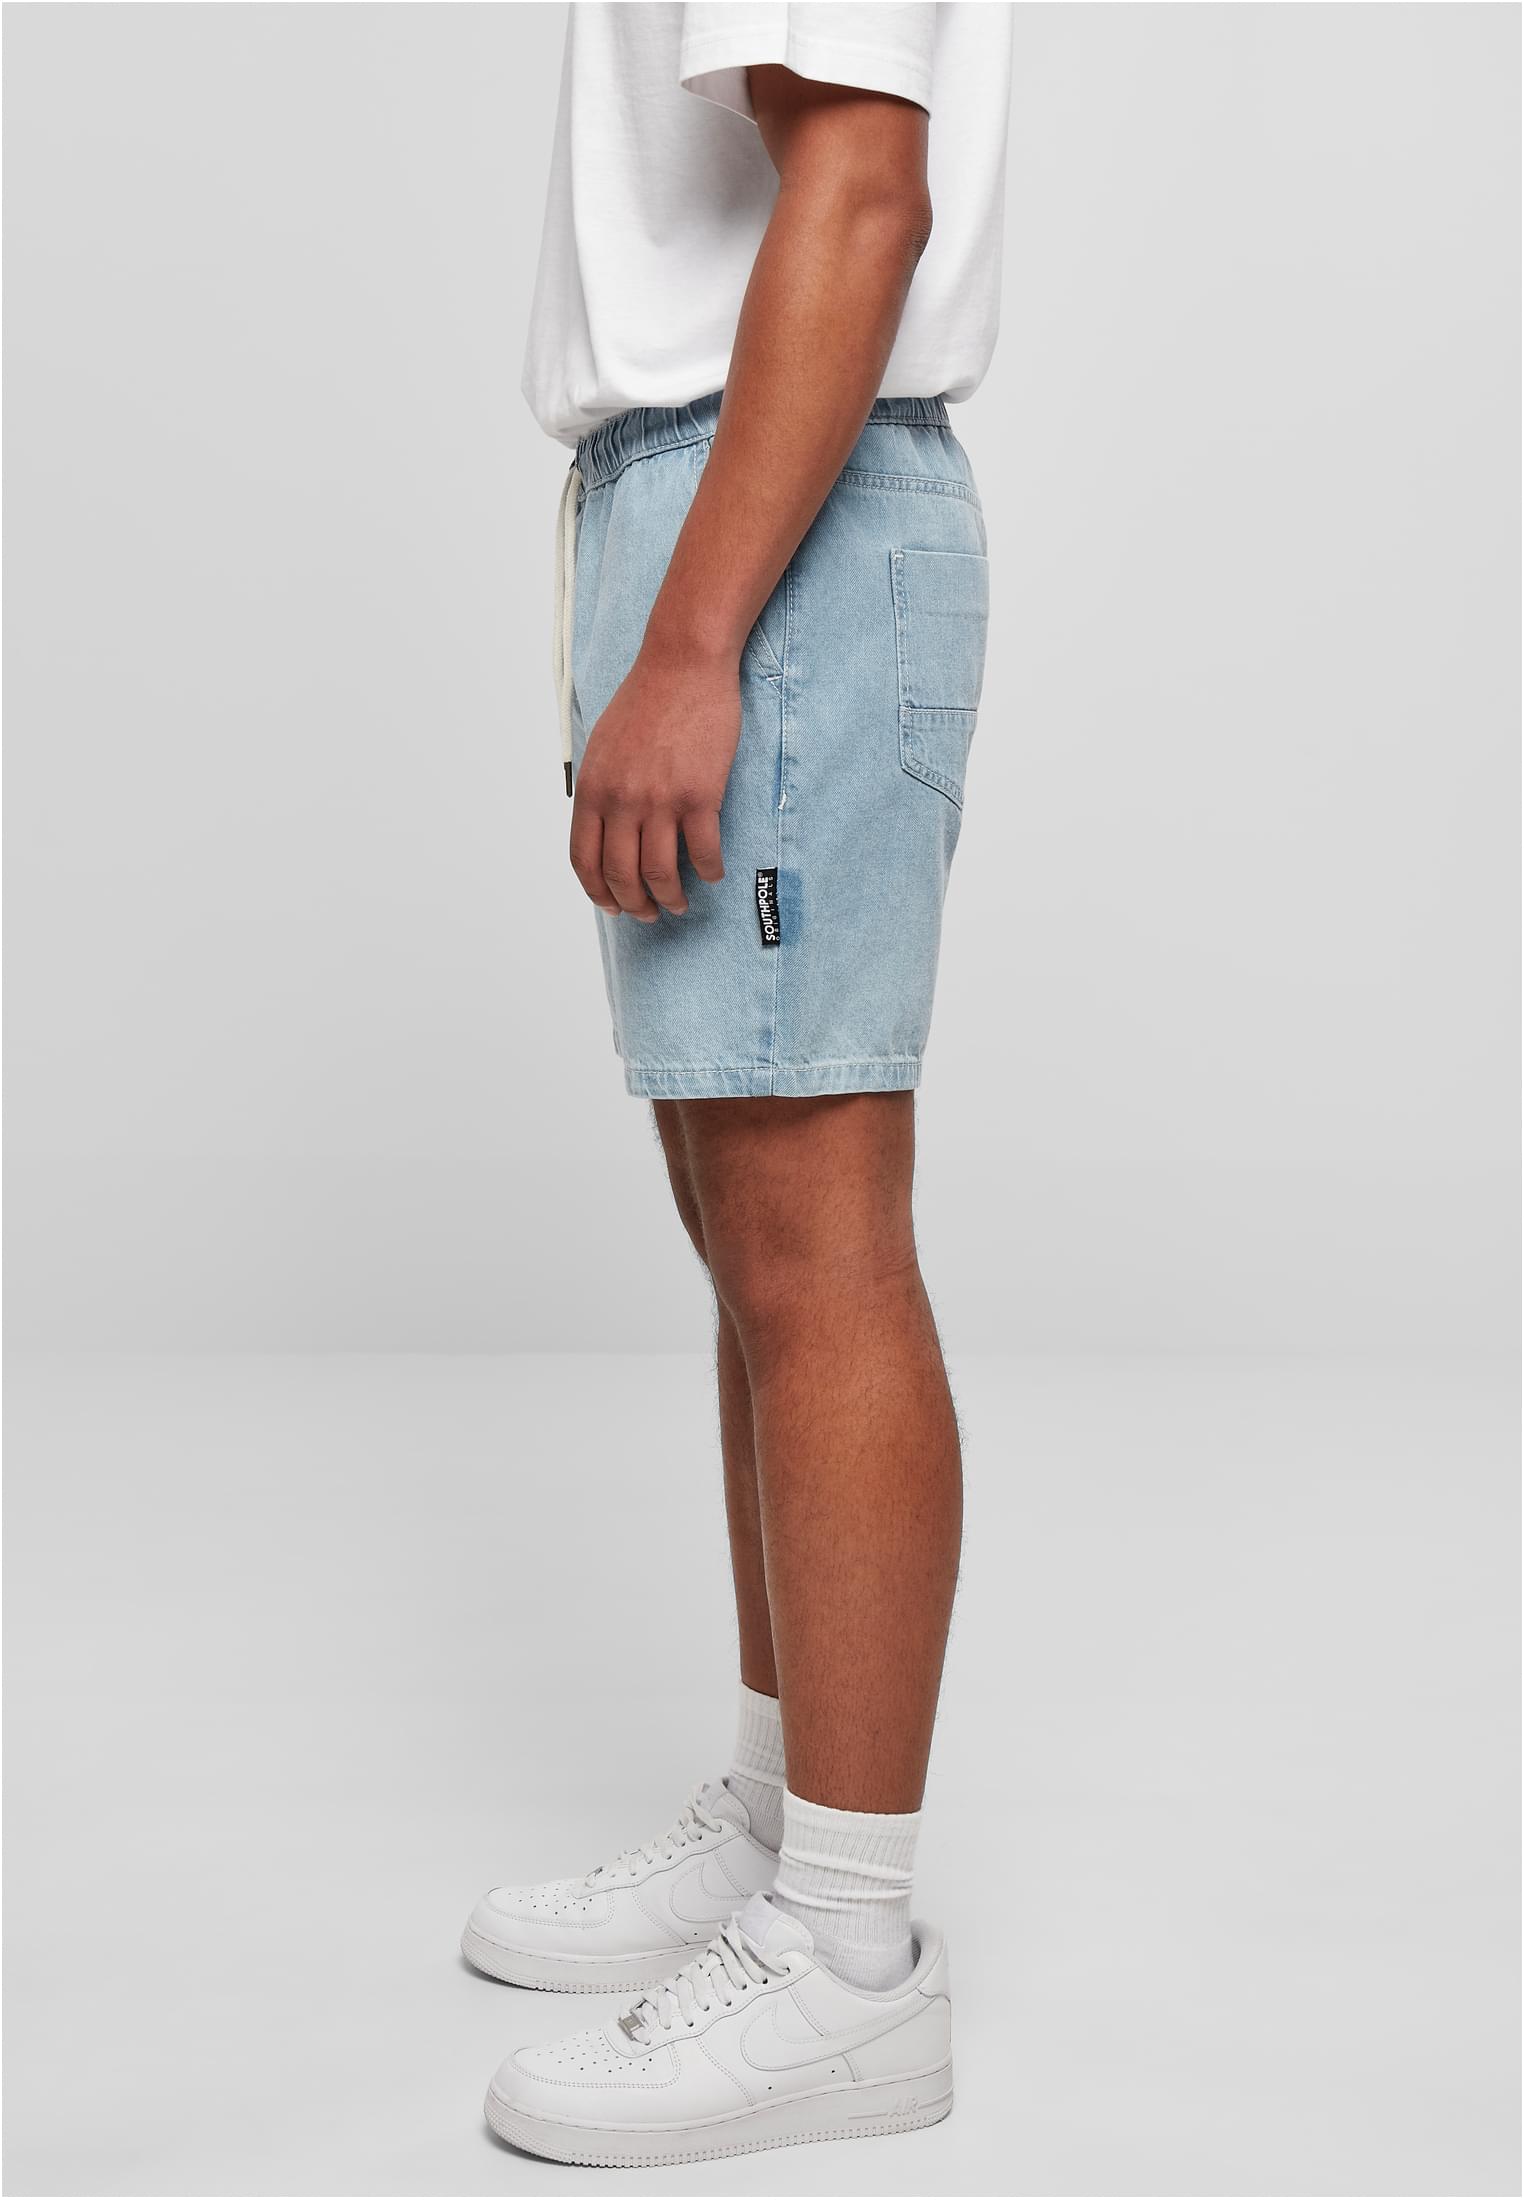 Saisonware Southpole Denim Shorts in Farbe retro ltblue destroyed washed